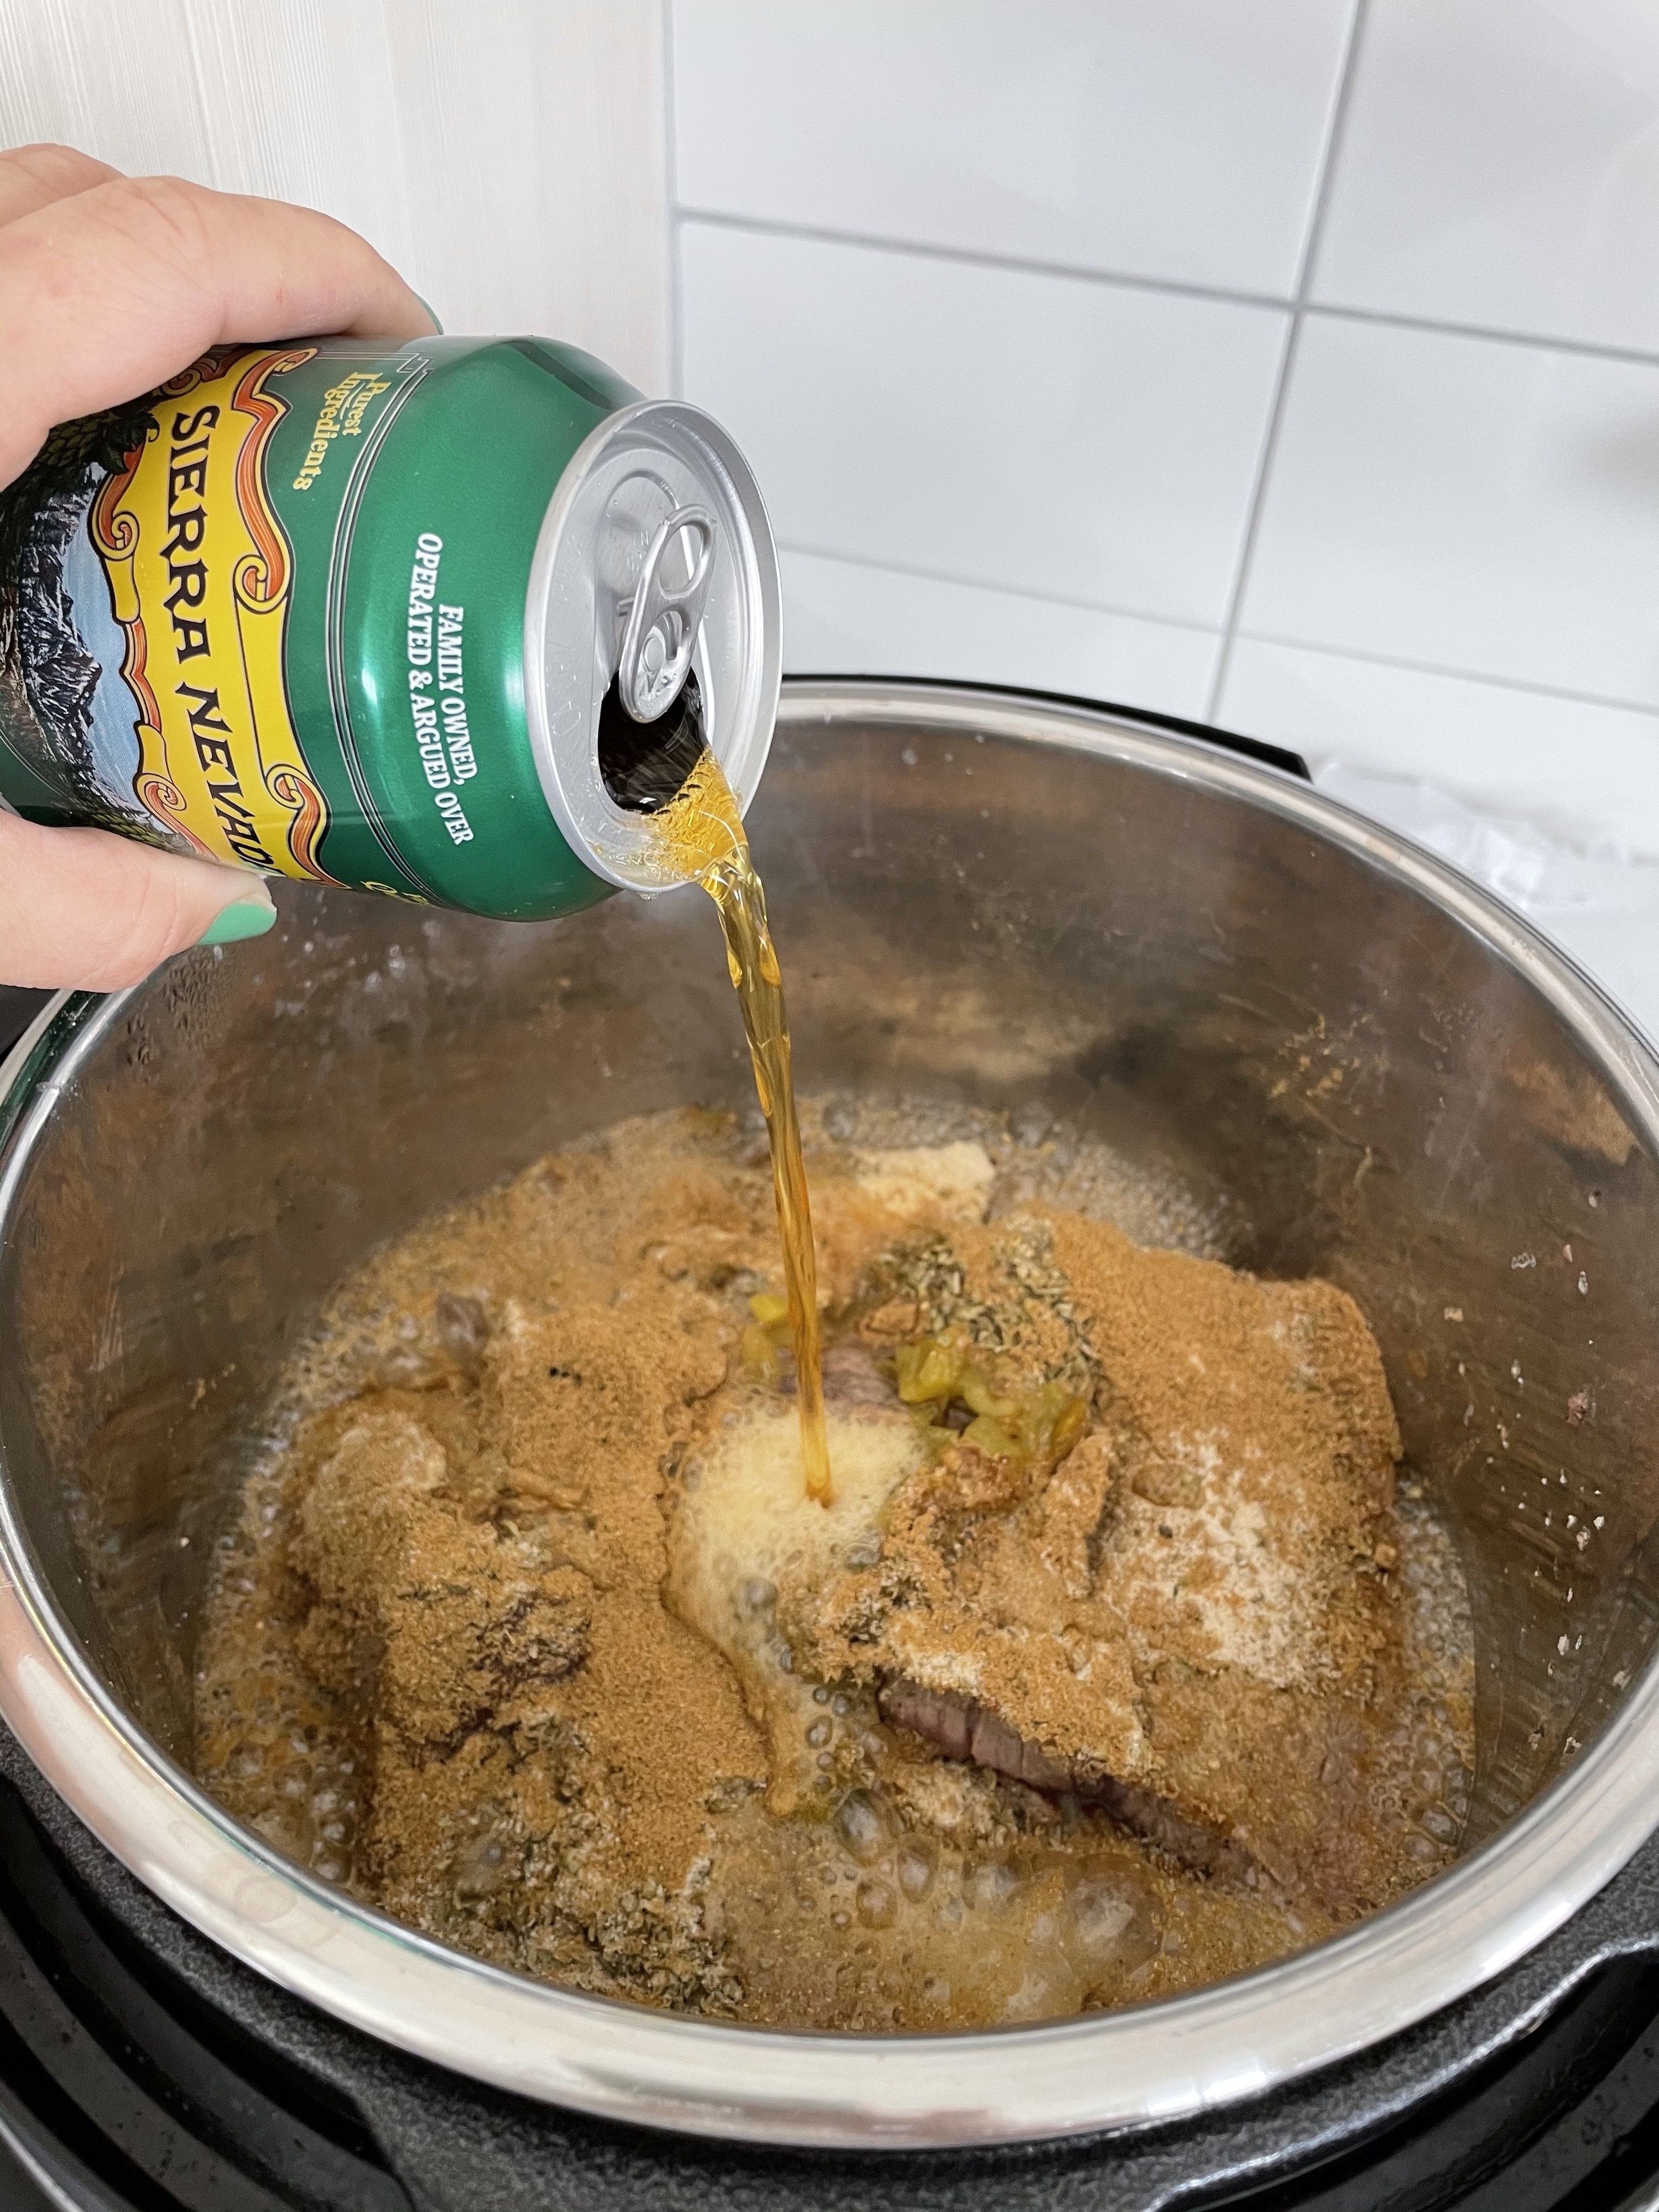 Braising the beef in an Instant Pot